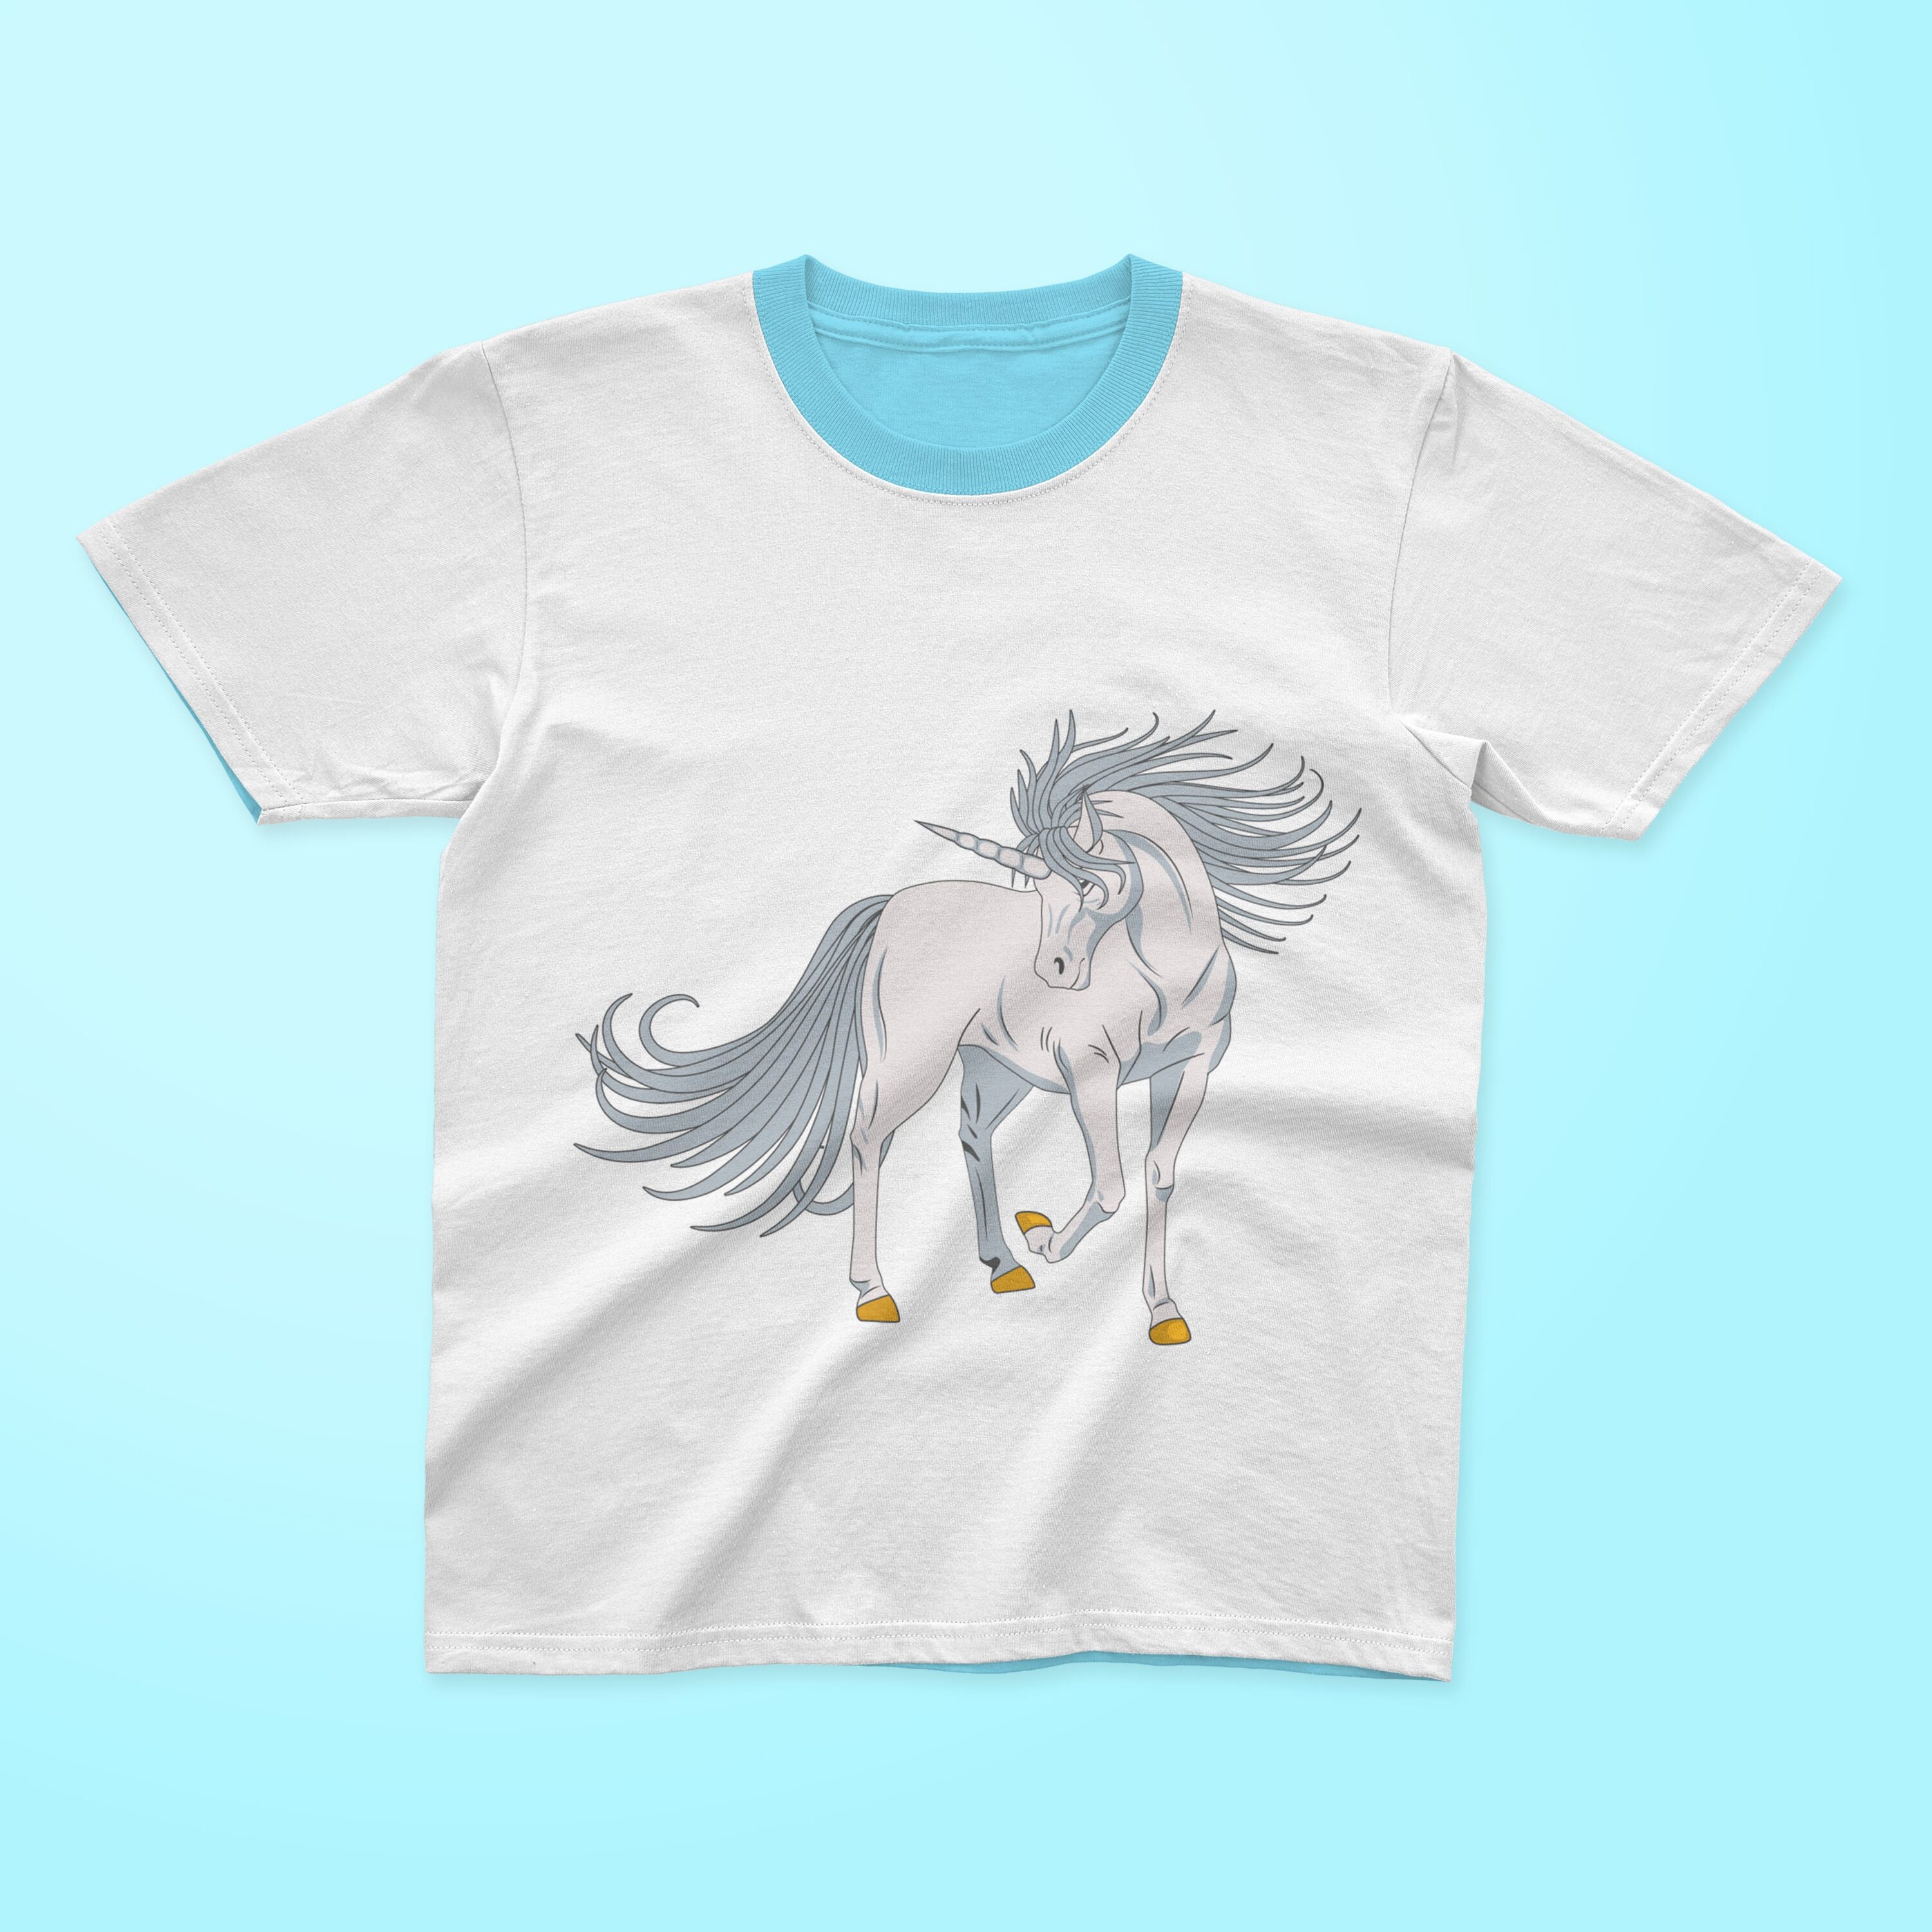 White t-shirt with a blue collar and an image of a unicorn on a light blue background.